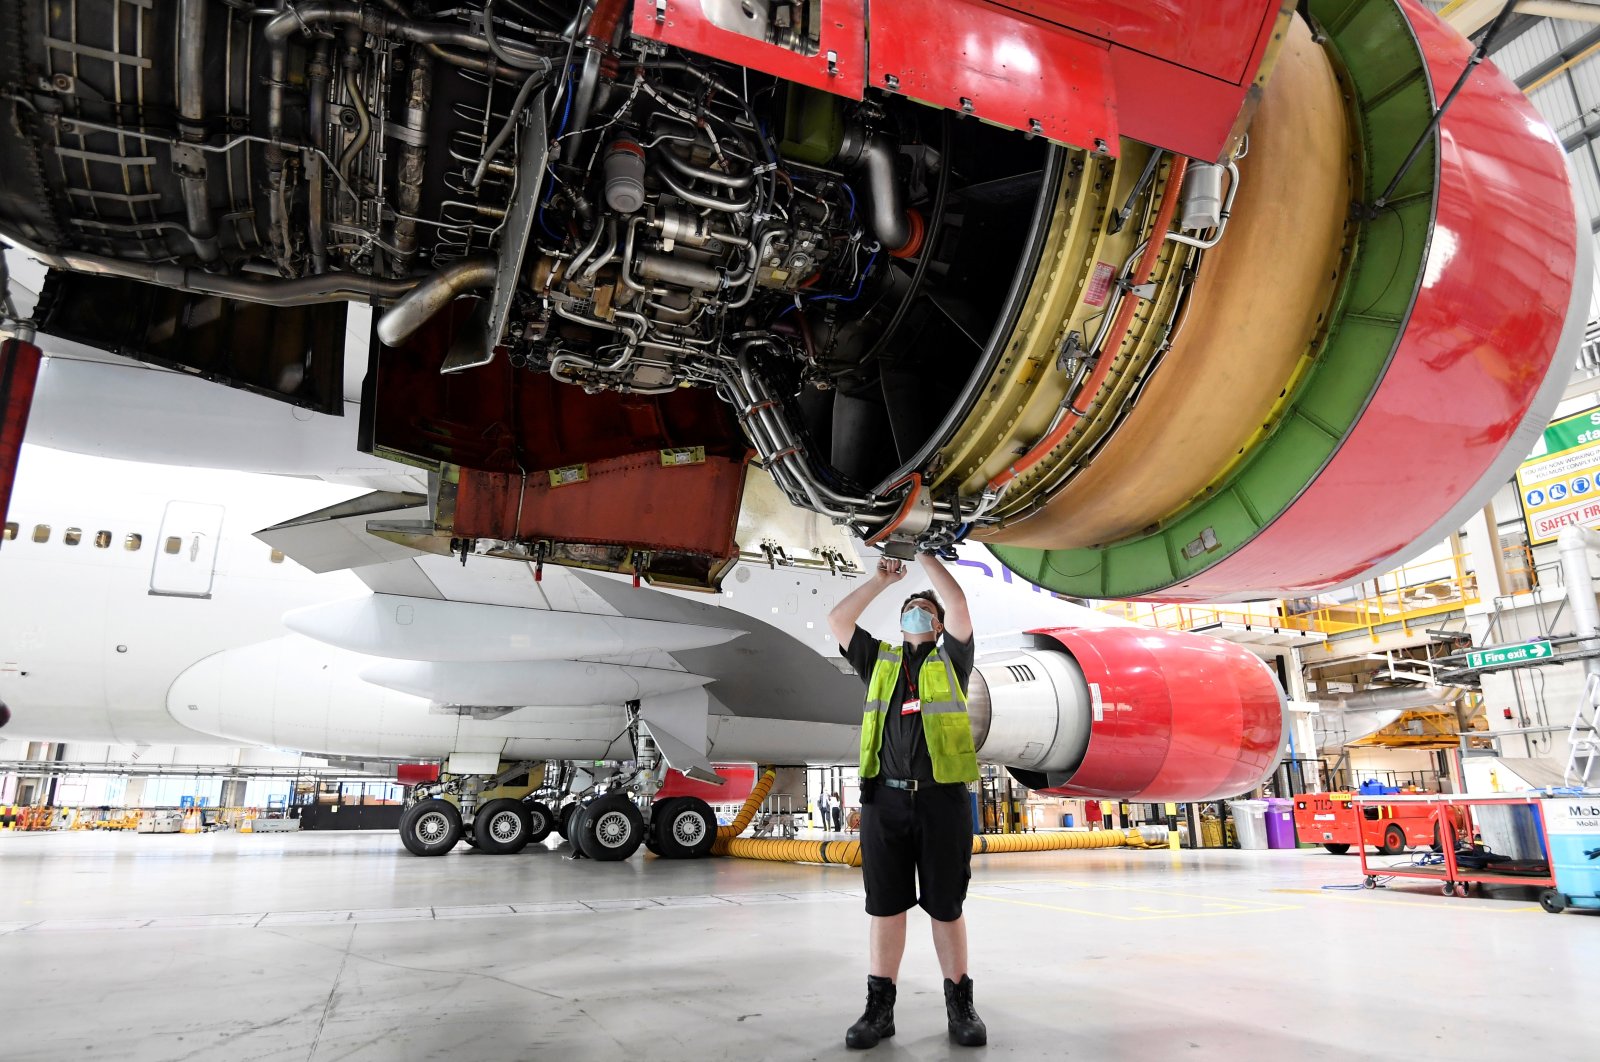 An engineer works on the Boeing 747 jumbo G-VROY, named "Pretty Woman," being retired from passenger service by Virgin Atlantic Airways, before its redeployment as freight and military carrier, in a maintenance hangar at Heathrow Airport, London, Britain, Dec. 11, 2020. (Reuters Photo)